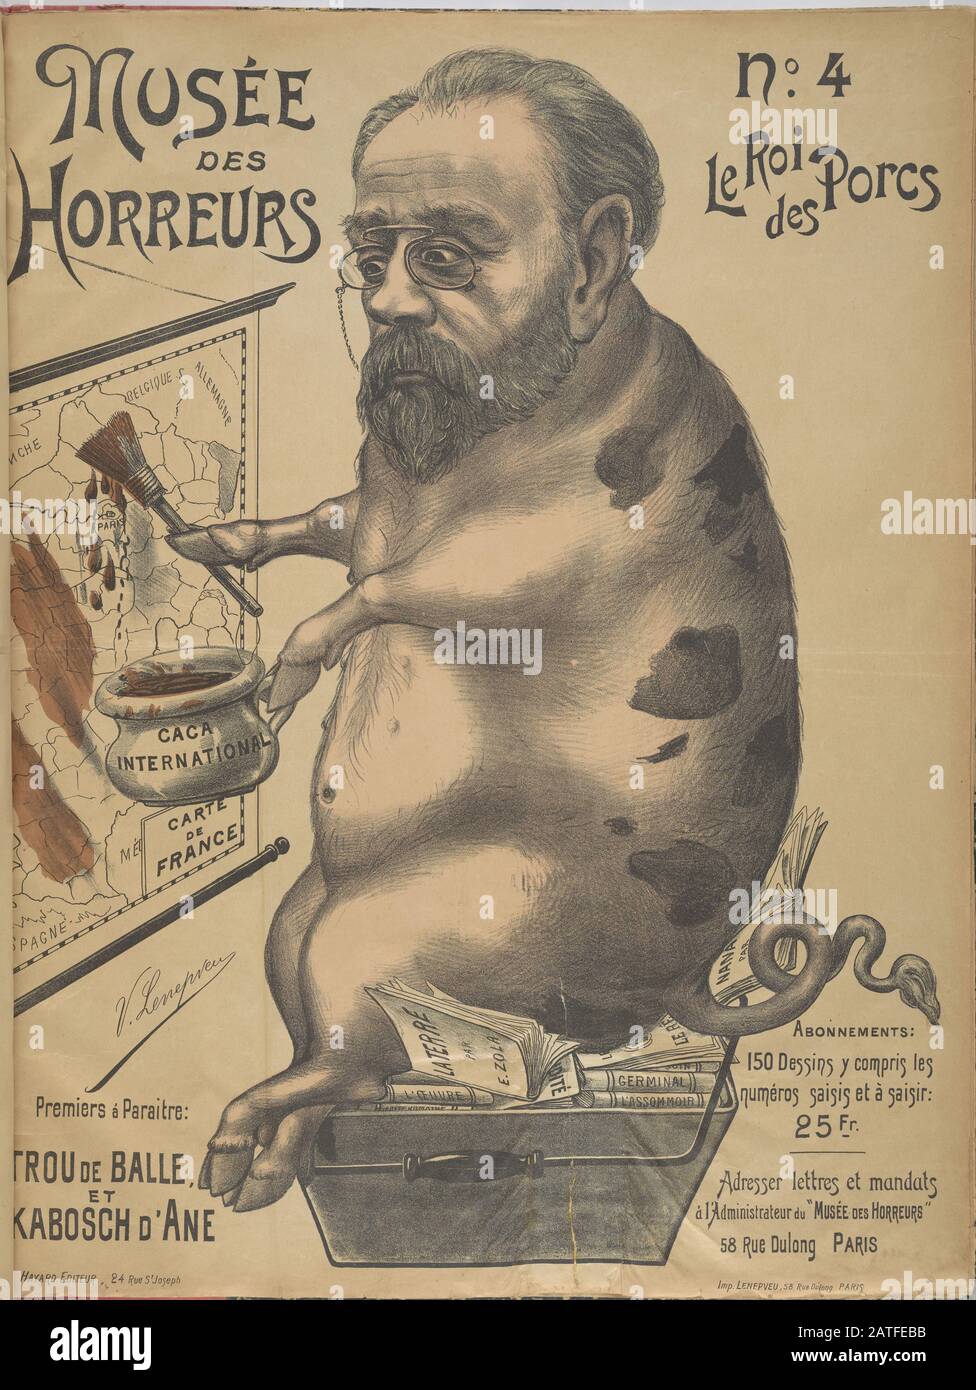 Musée des Horreurs - No. 4 Le Roi des Porcs  - 1899   -  Lenepveu, V.     -  Caricature of writer Émile Zola (1840-1902) as a pig, captioned 'King of Pigs,' sitting on a stack of his novels and painting excrement over the map of France. Zola helped expose the framing of Dreyfus in J'accuse, an open letter published in the Paris newspaper L'Aurore on January 13, 1898. Hand colored. Stock Photo